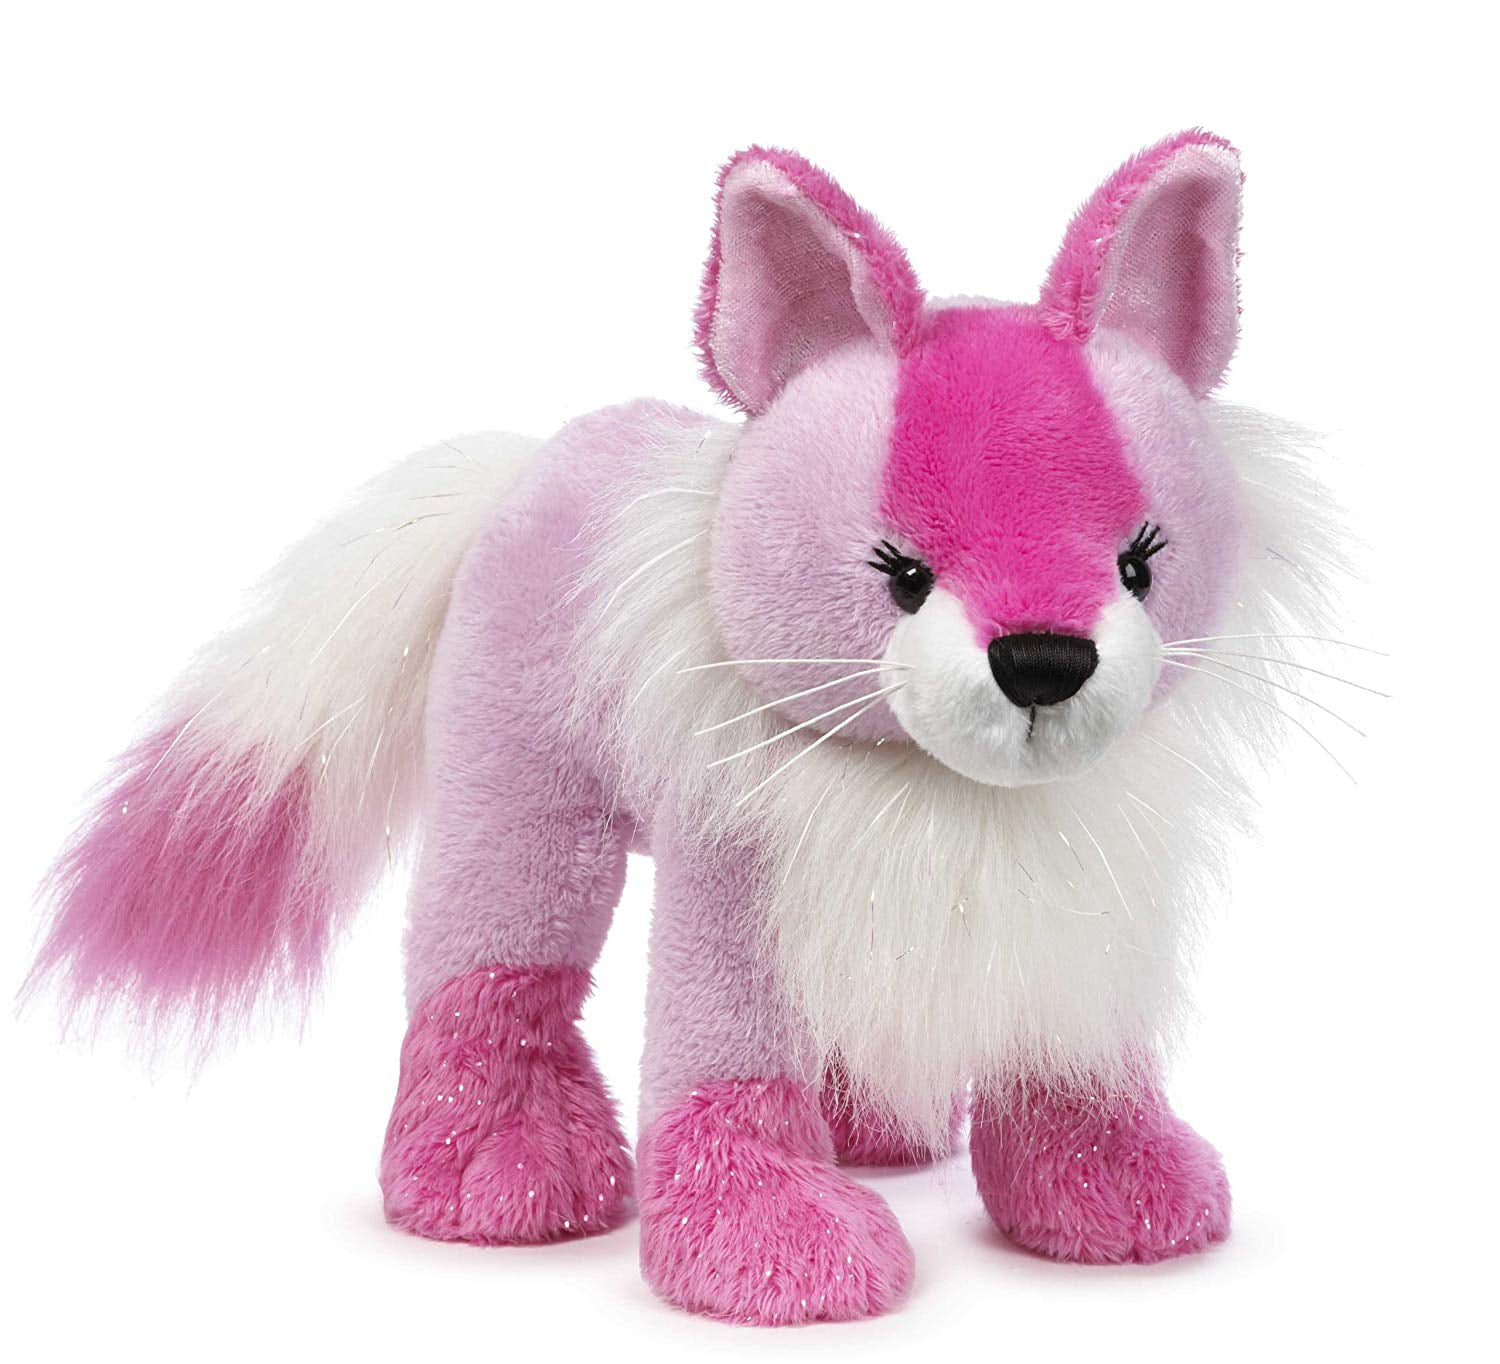 Webkinz Classic Floral Fox *Code Only*